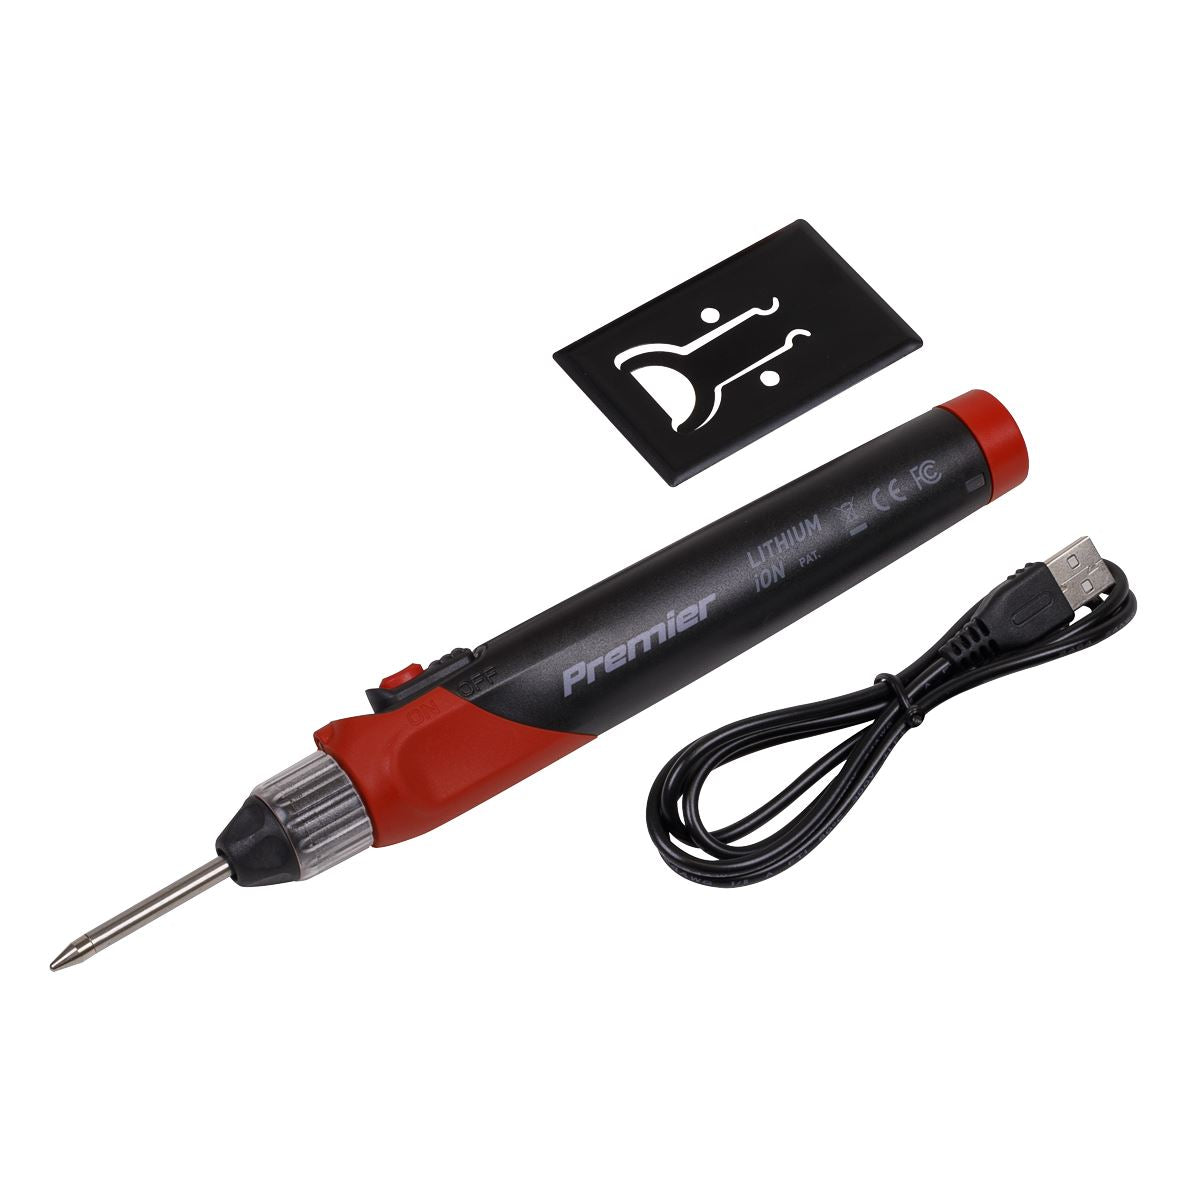 Sealey Premier Soldering Iron Rechargeable Lithium-ion 12W